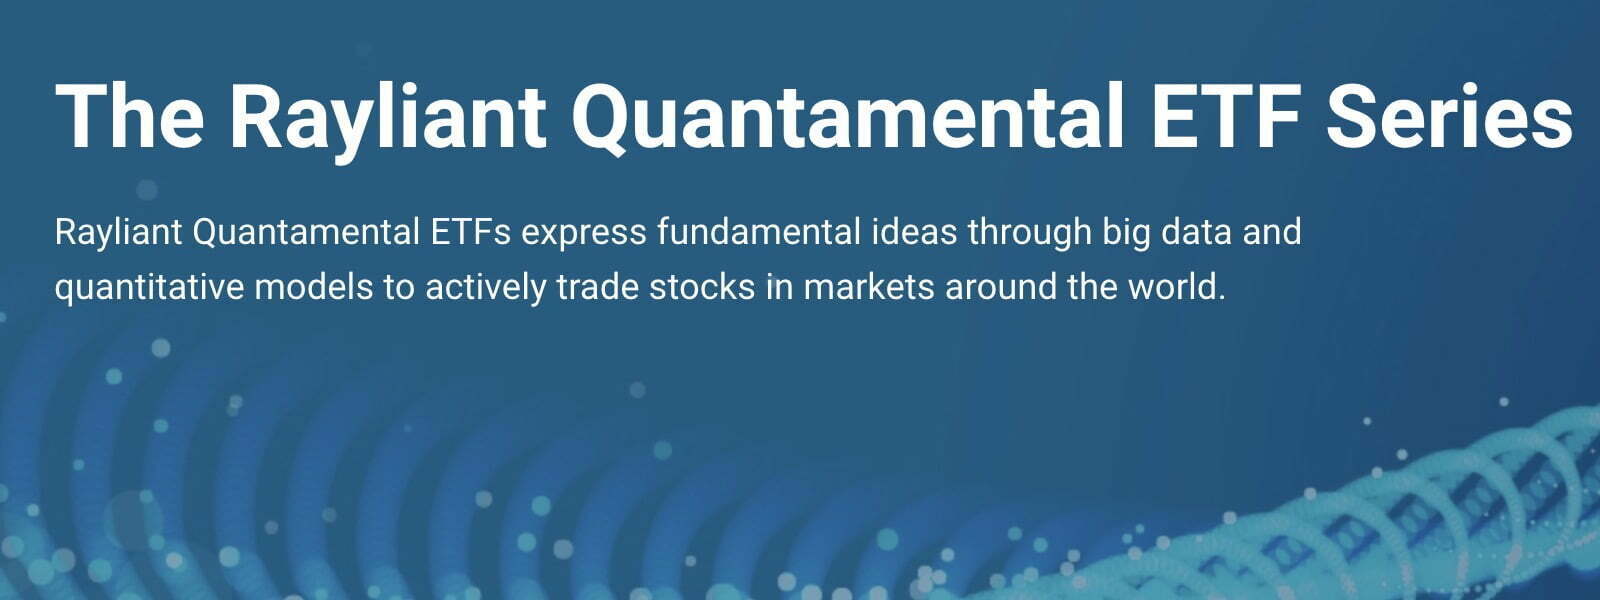 The Rayliant Quantamental ETF Series Roster Of Funds 